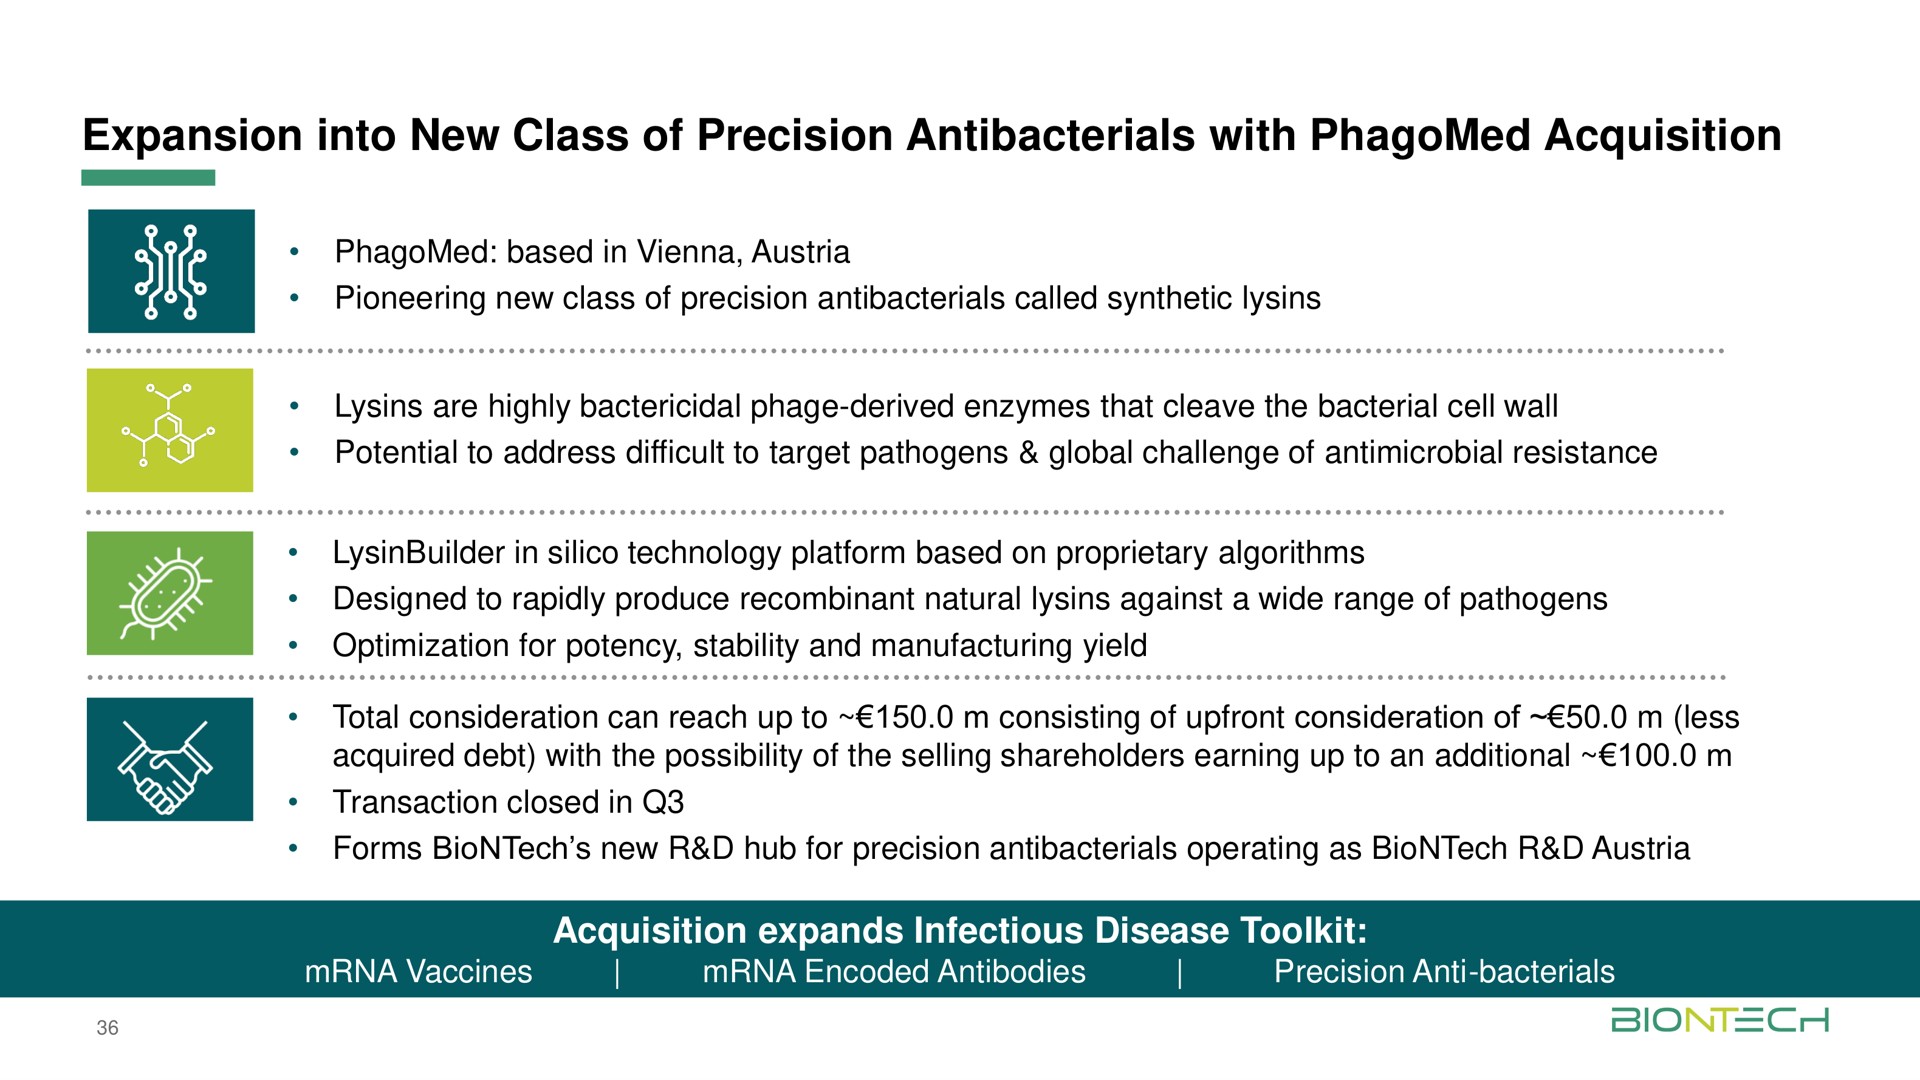 expansion into new class of precision antibacterials with acquisition acquisition expands infectious disease | BioNTech